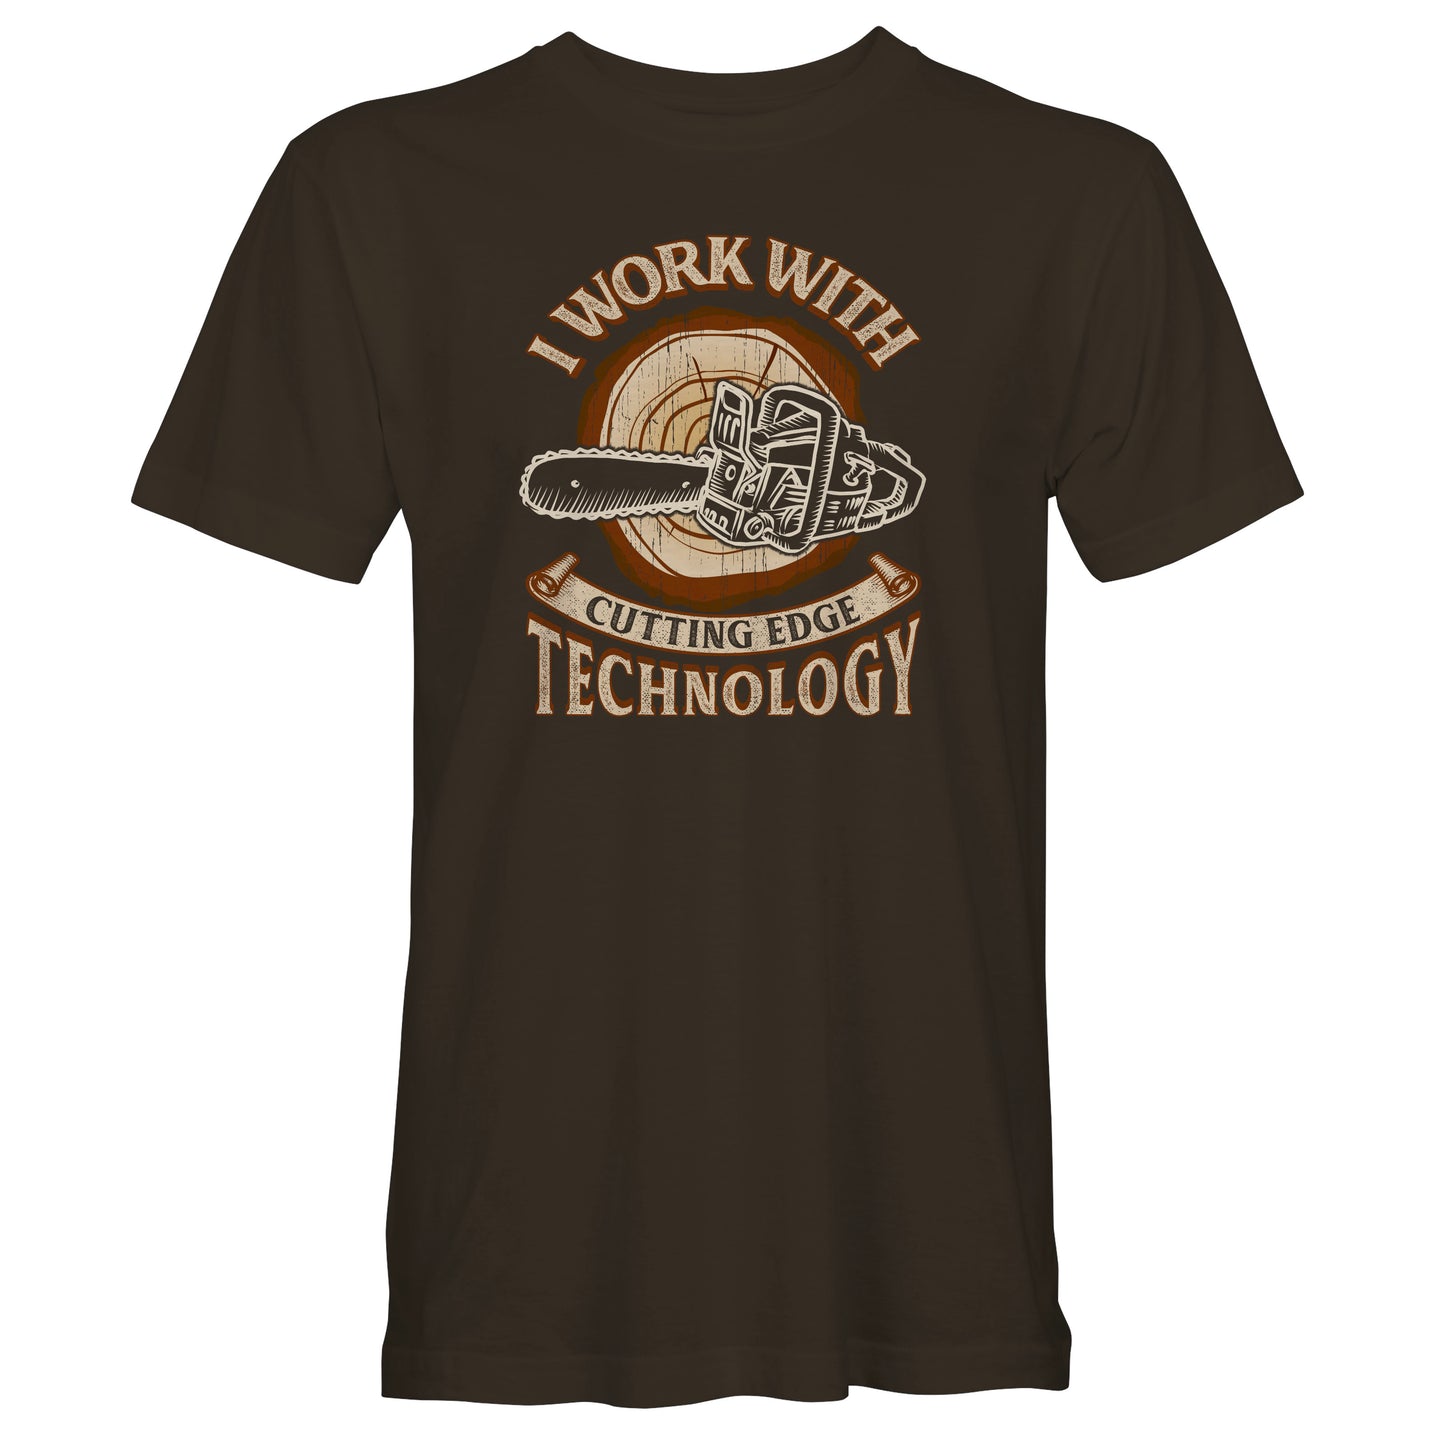 Funny Lumberjack Woodwork T-Shirt, I Work With Cutting Edge Technology Pun Gift Idea, Humorous Arborist Chainsaw Tee Shirt T Top